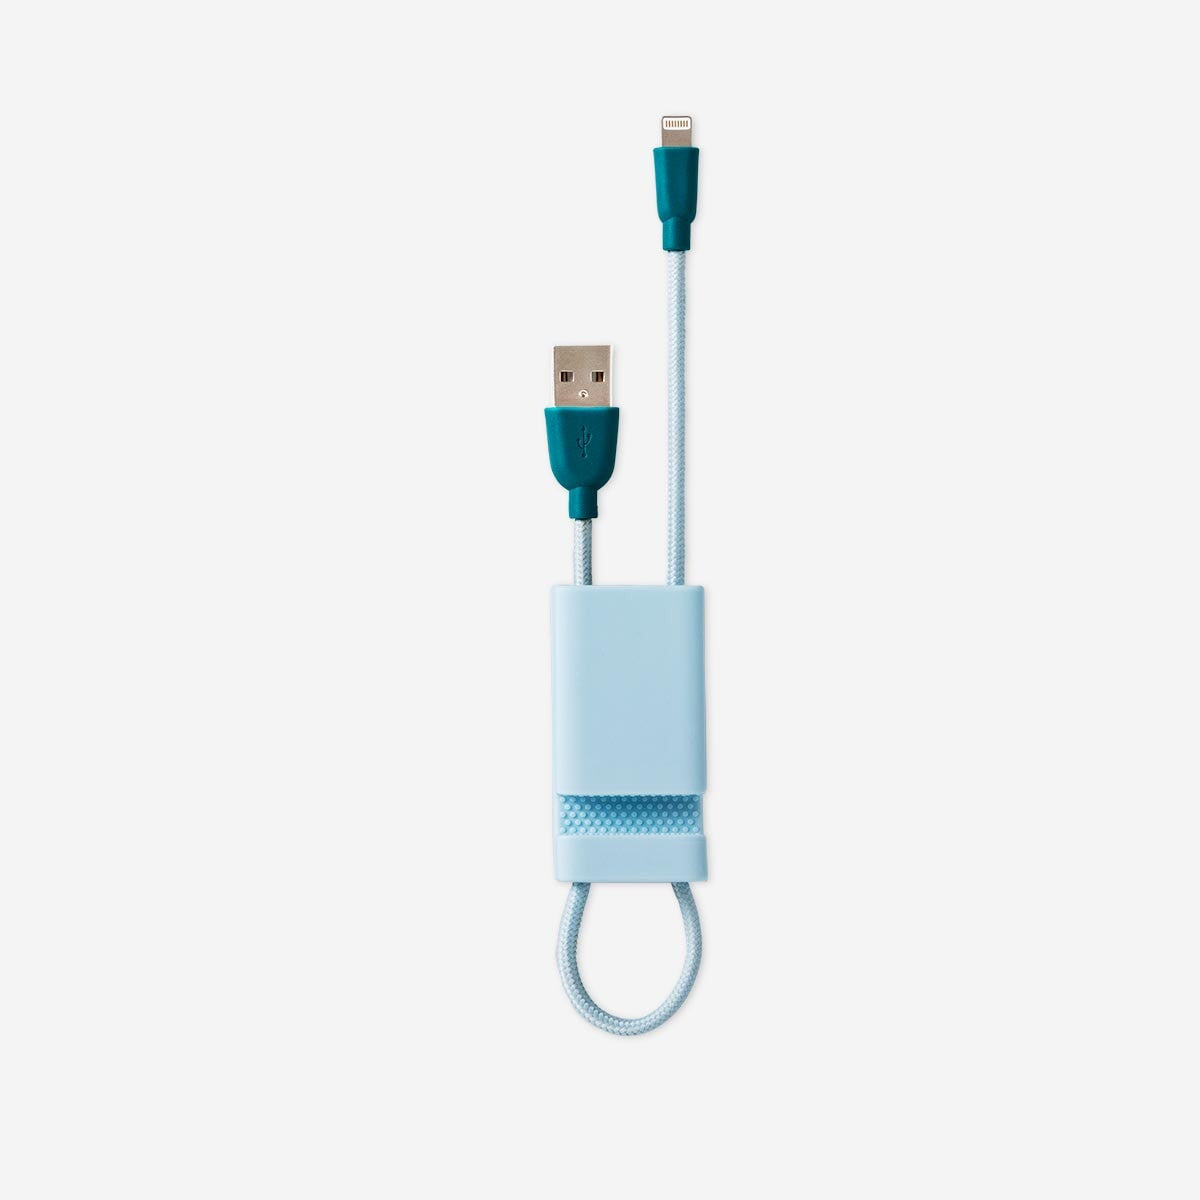 Charging cable. With holder Media Flying Tiger Copenhagen 